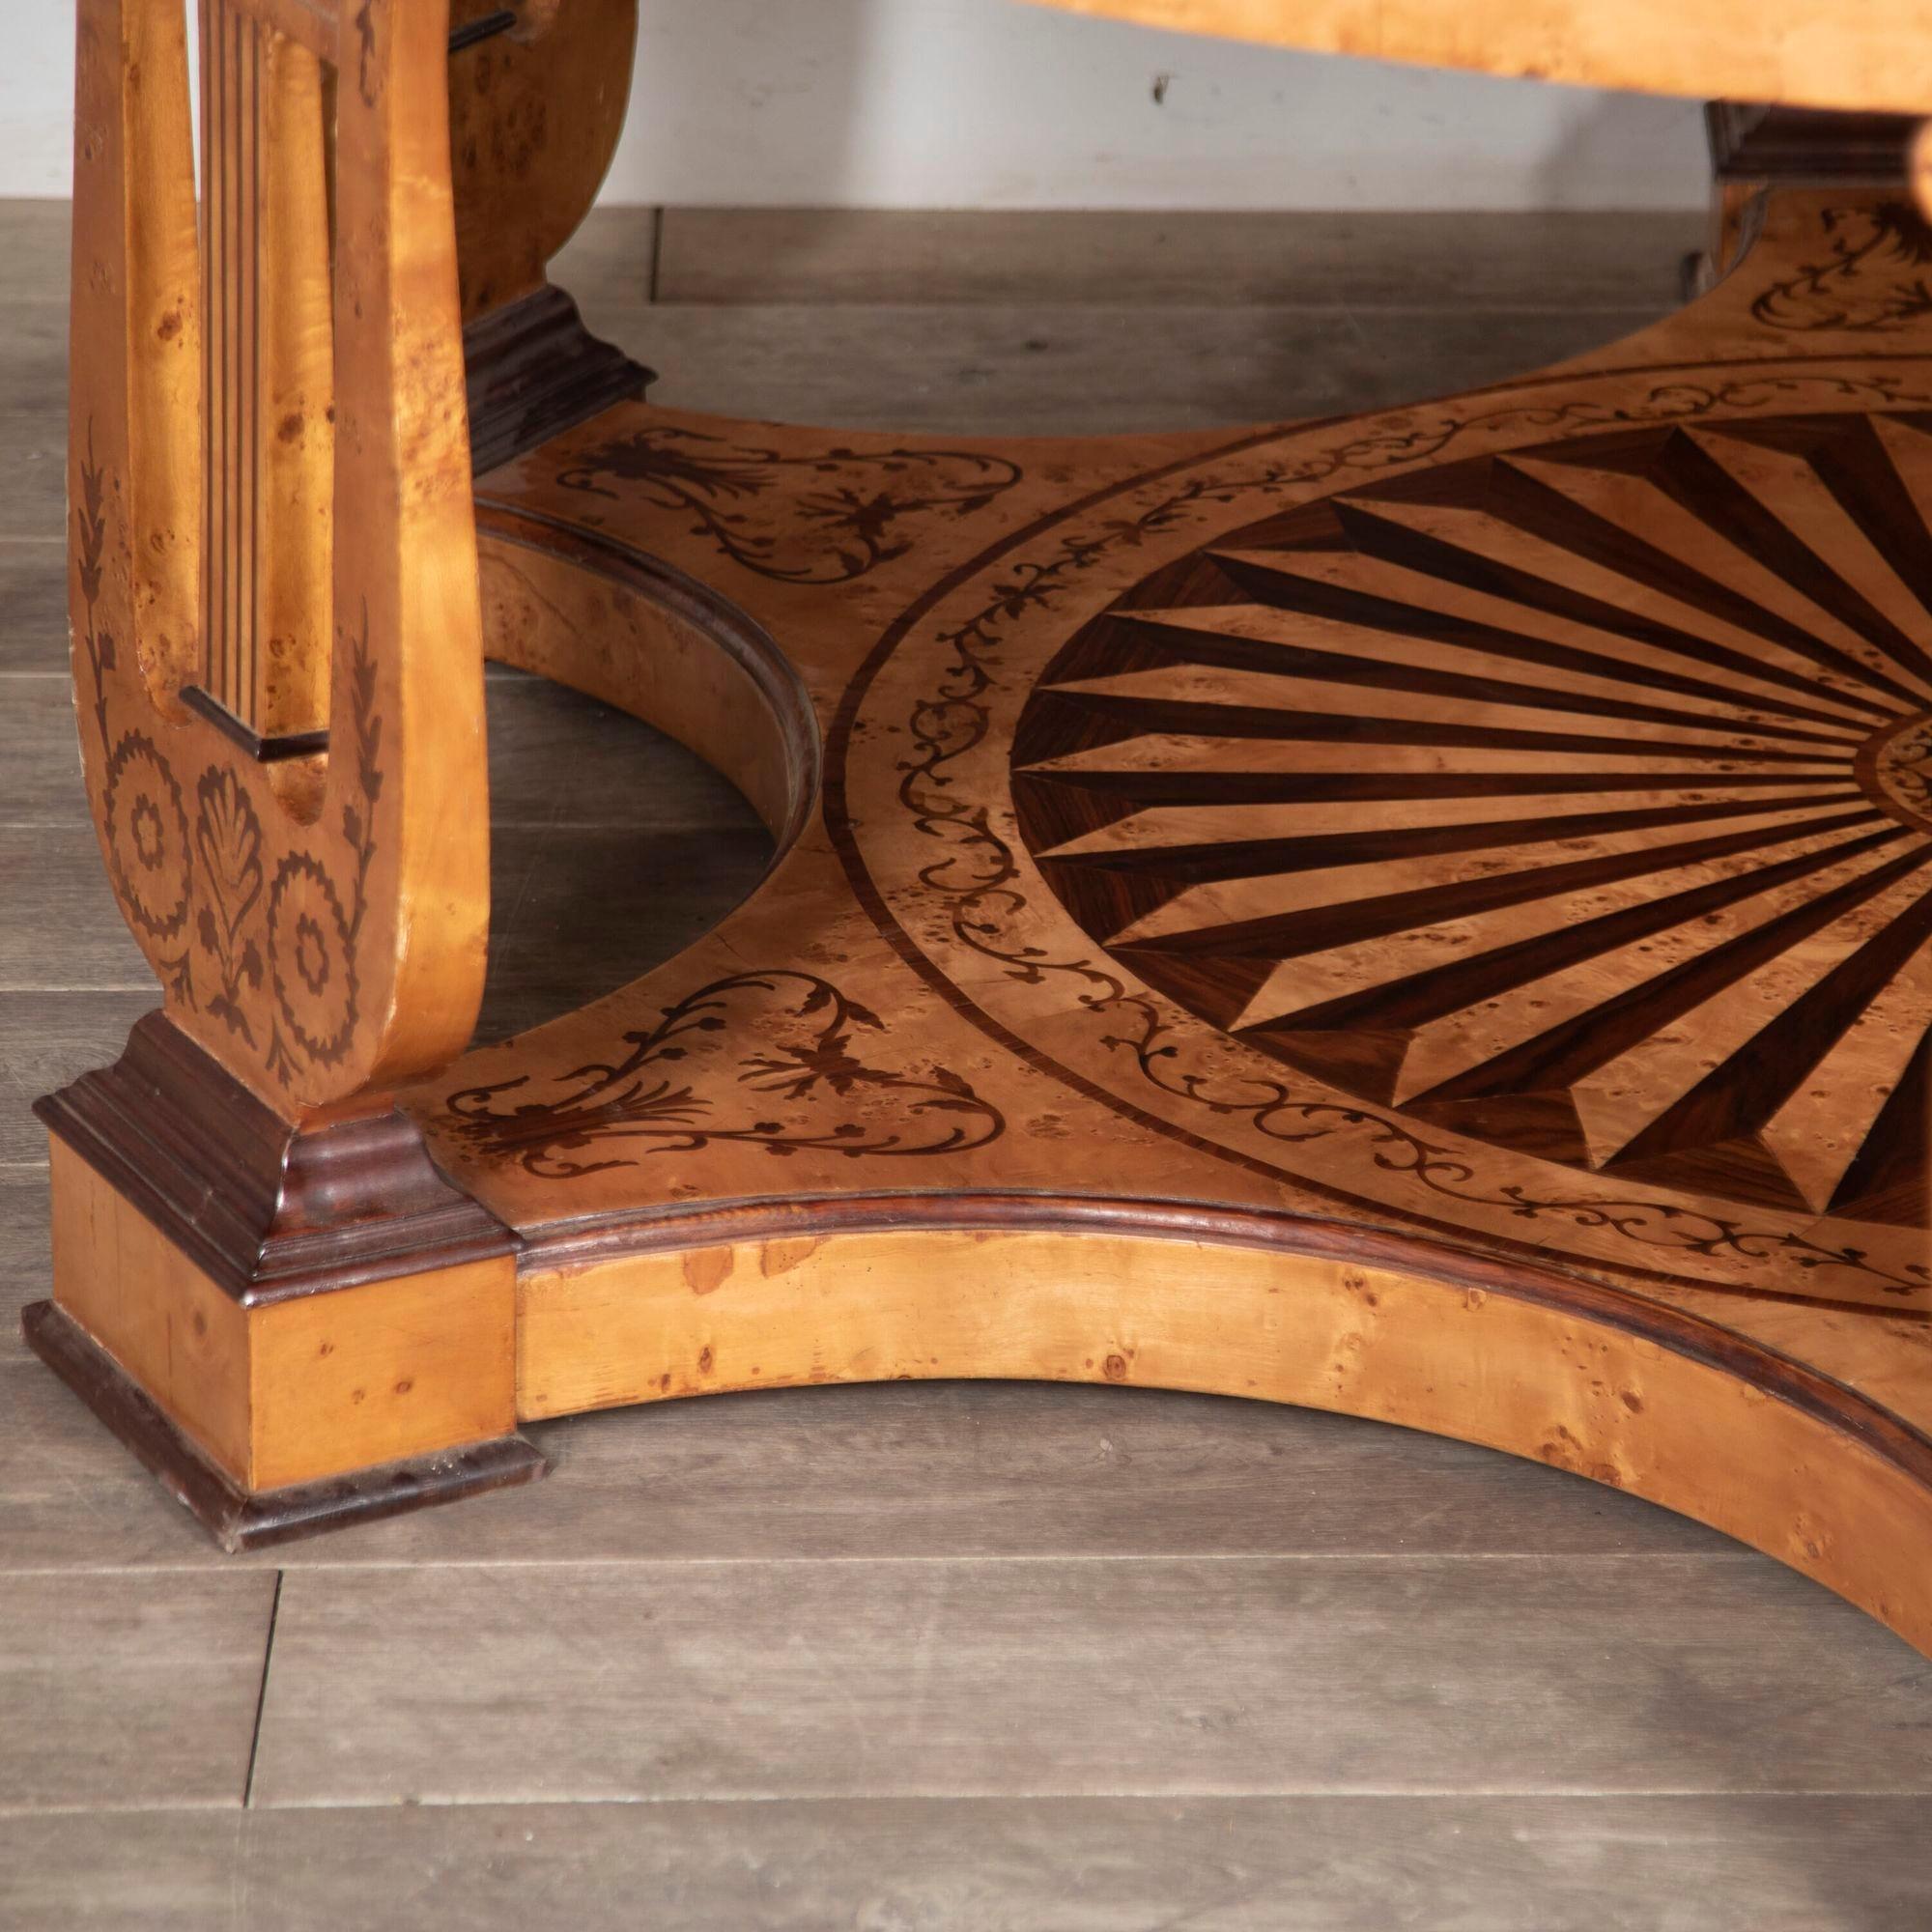 Large scale Charles X style centre table with contrasting mahogany and birds eye maple.
This table features an exceptional segmented base and six upright supports in the shape of a lyre musical instrument. This has an exceptional inlay all around